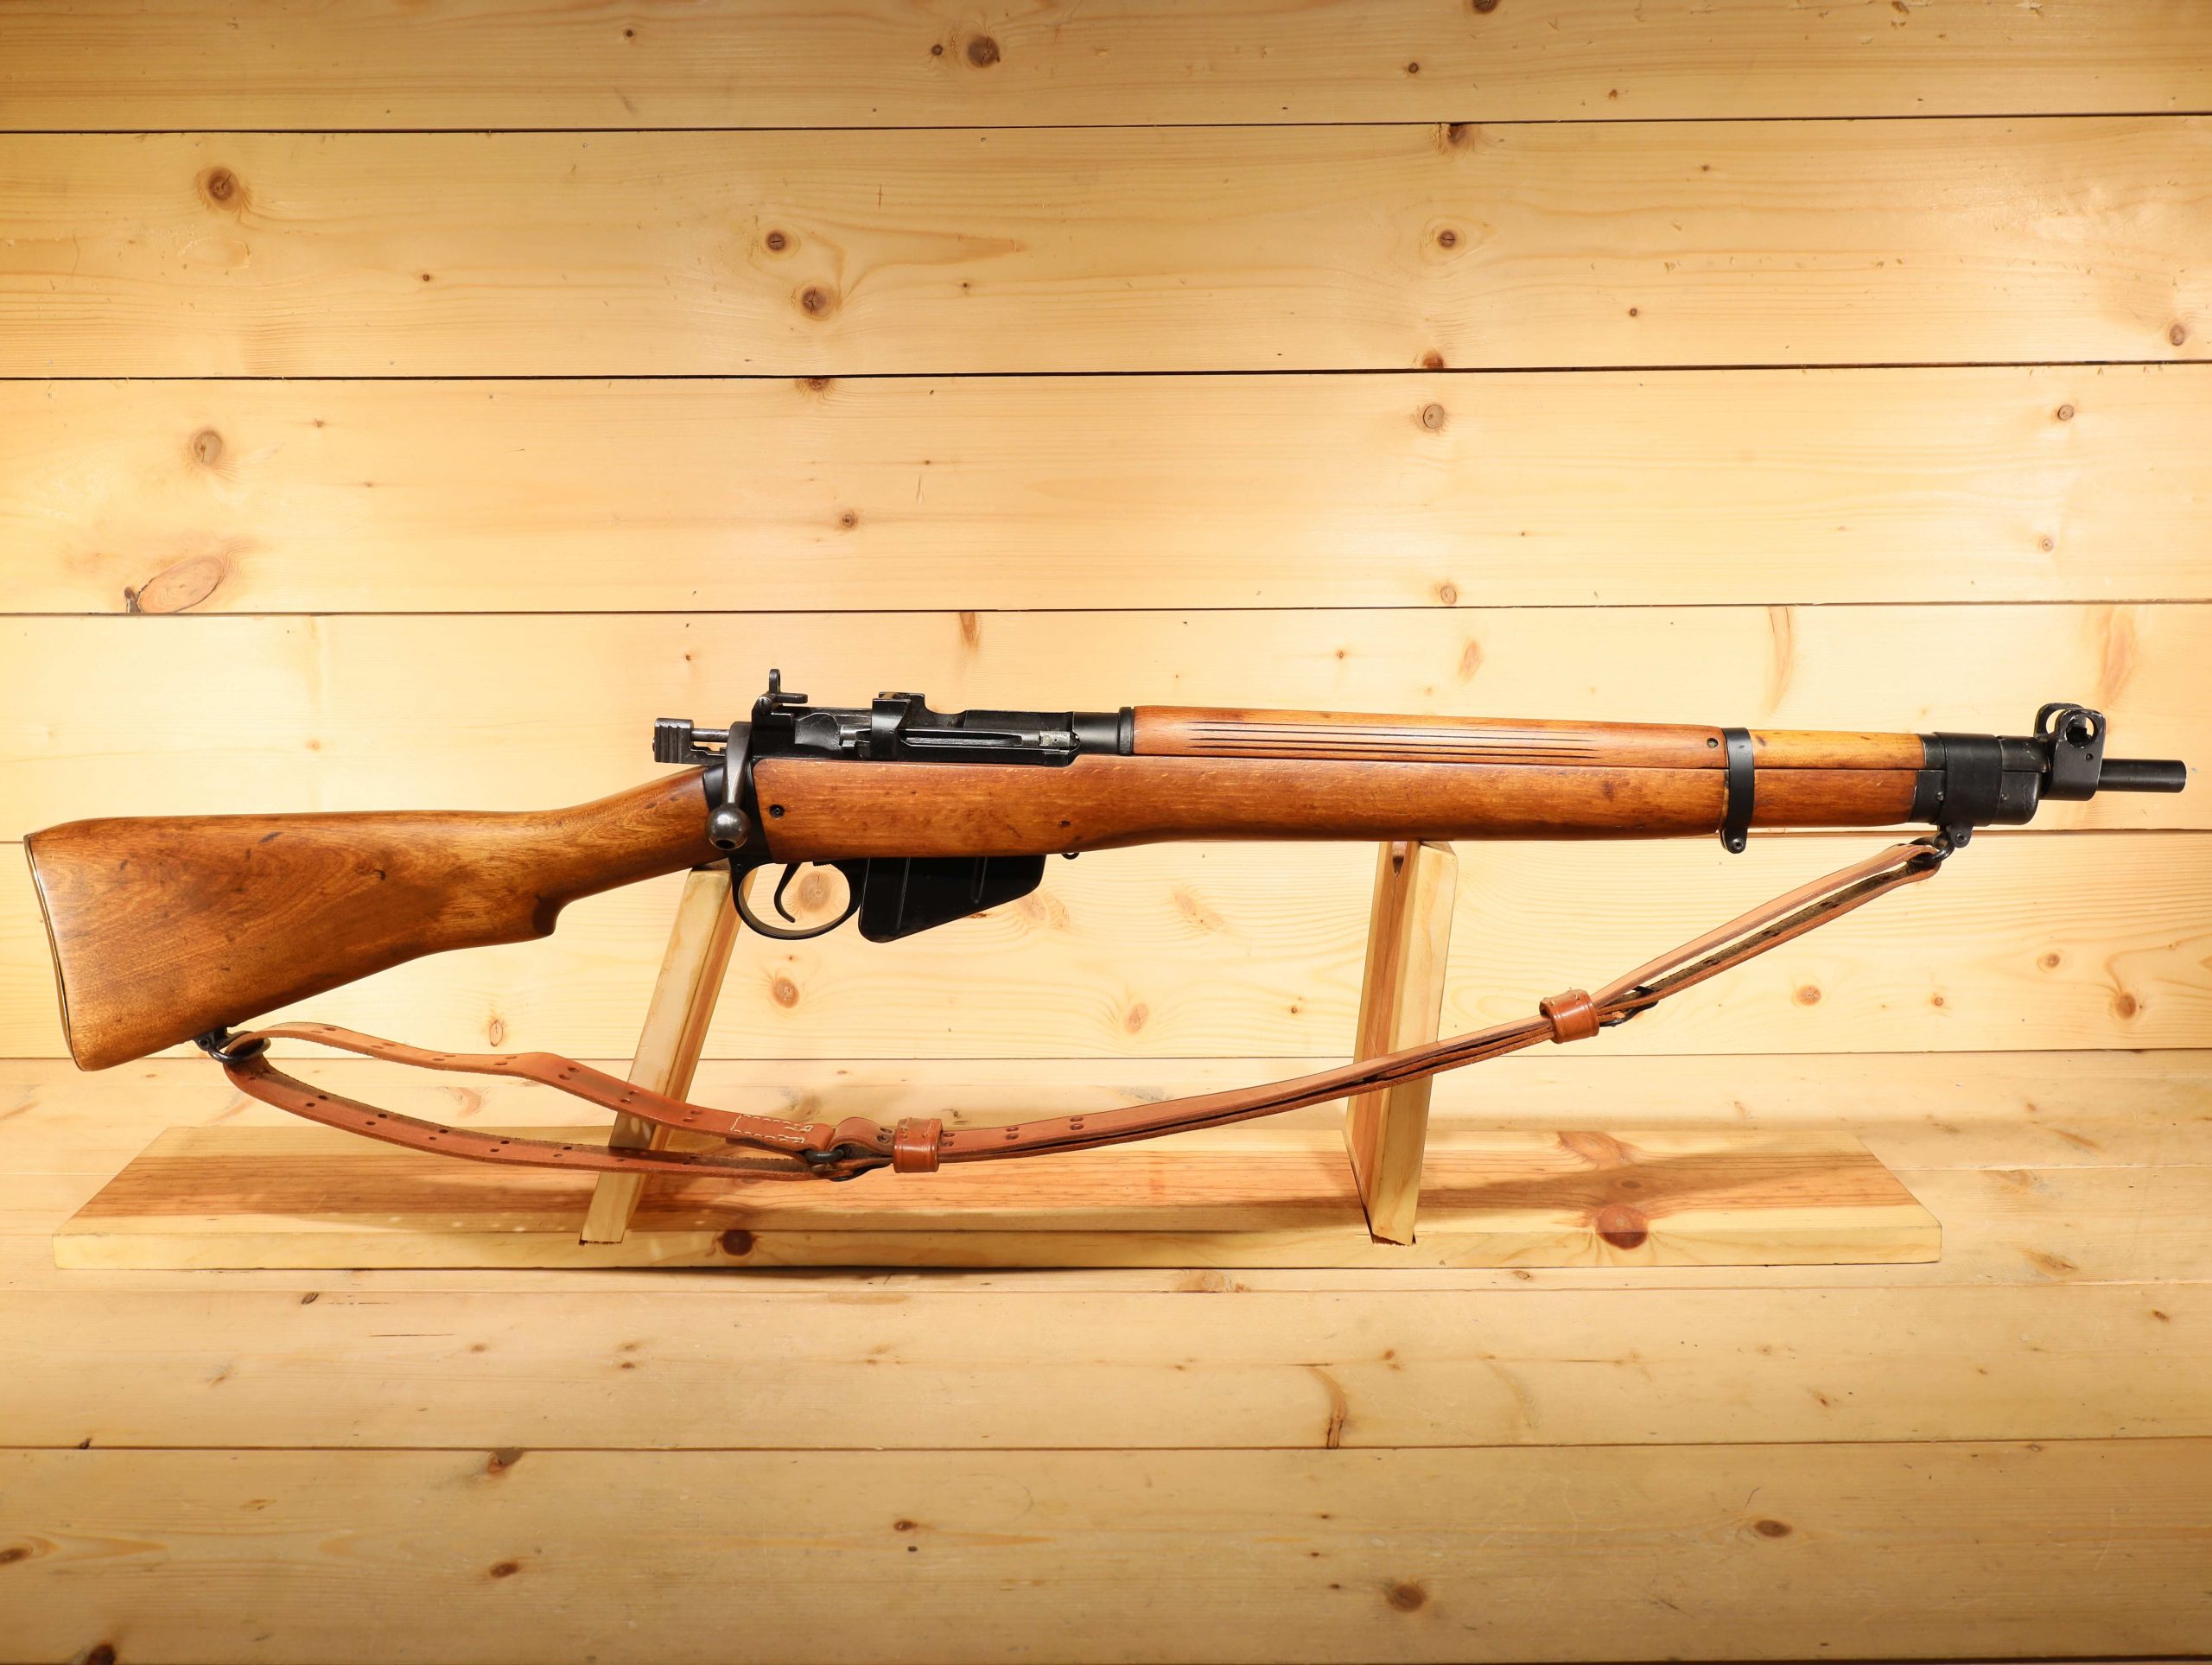 LEE ENFIELD NO4 303BRITISH (LONGBRANCH) RIFLE - Goble's Firearms